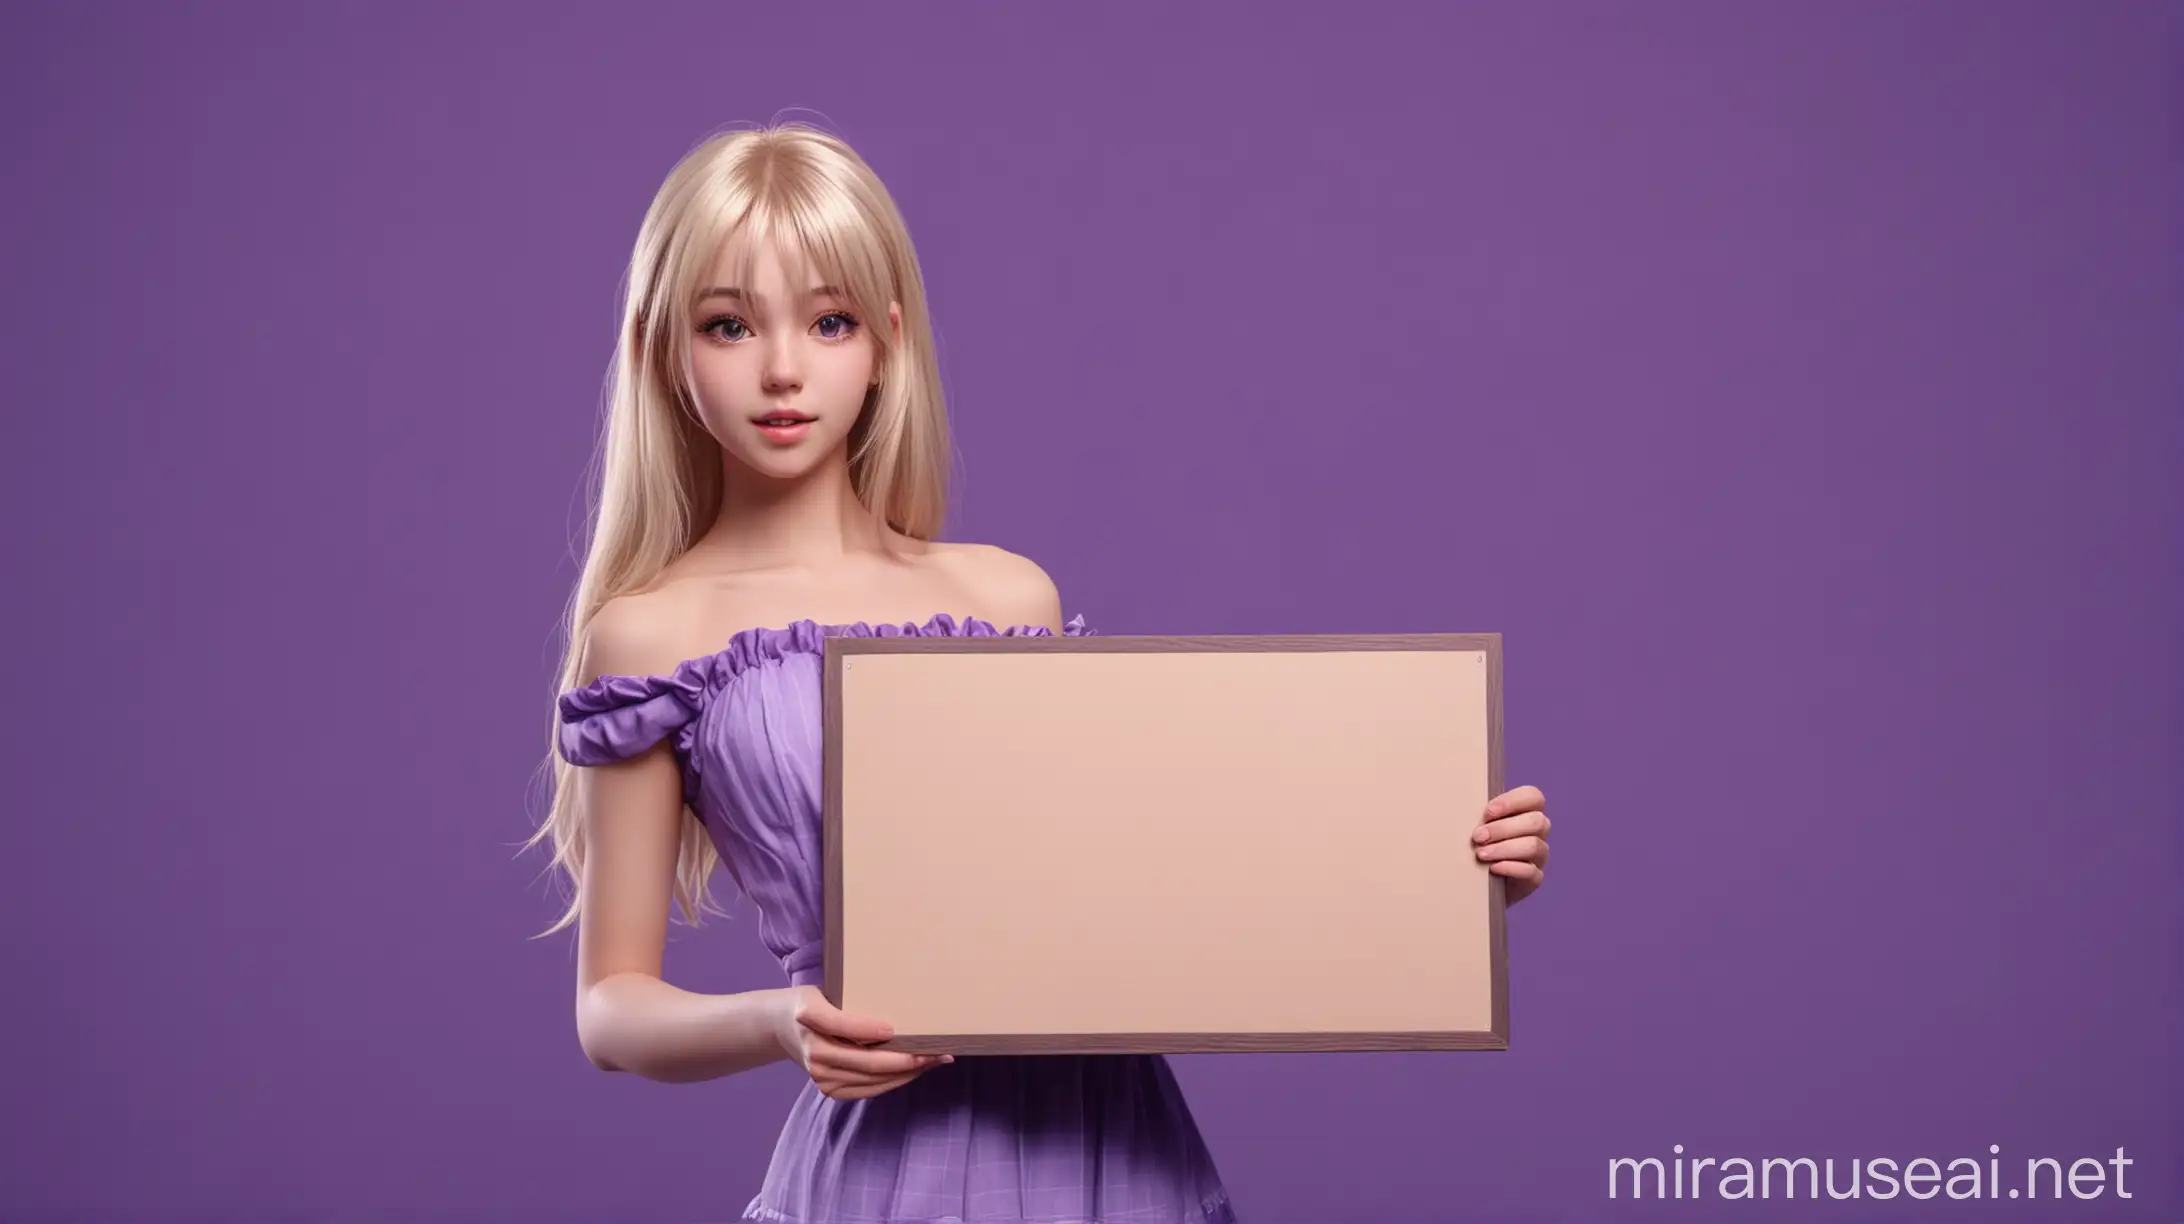 Cute Anime Girl Holding Empty Signboard on Purple Background